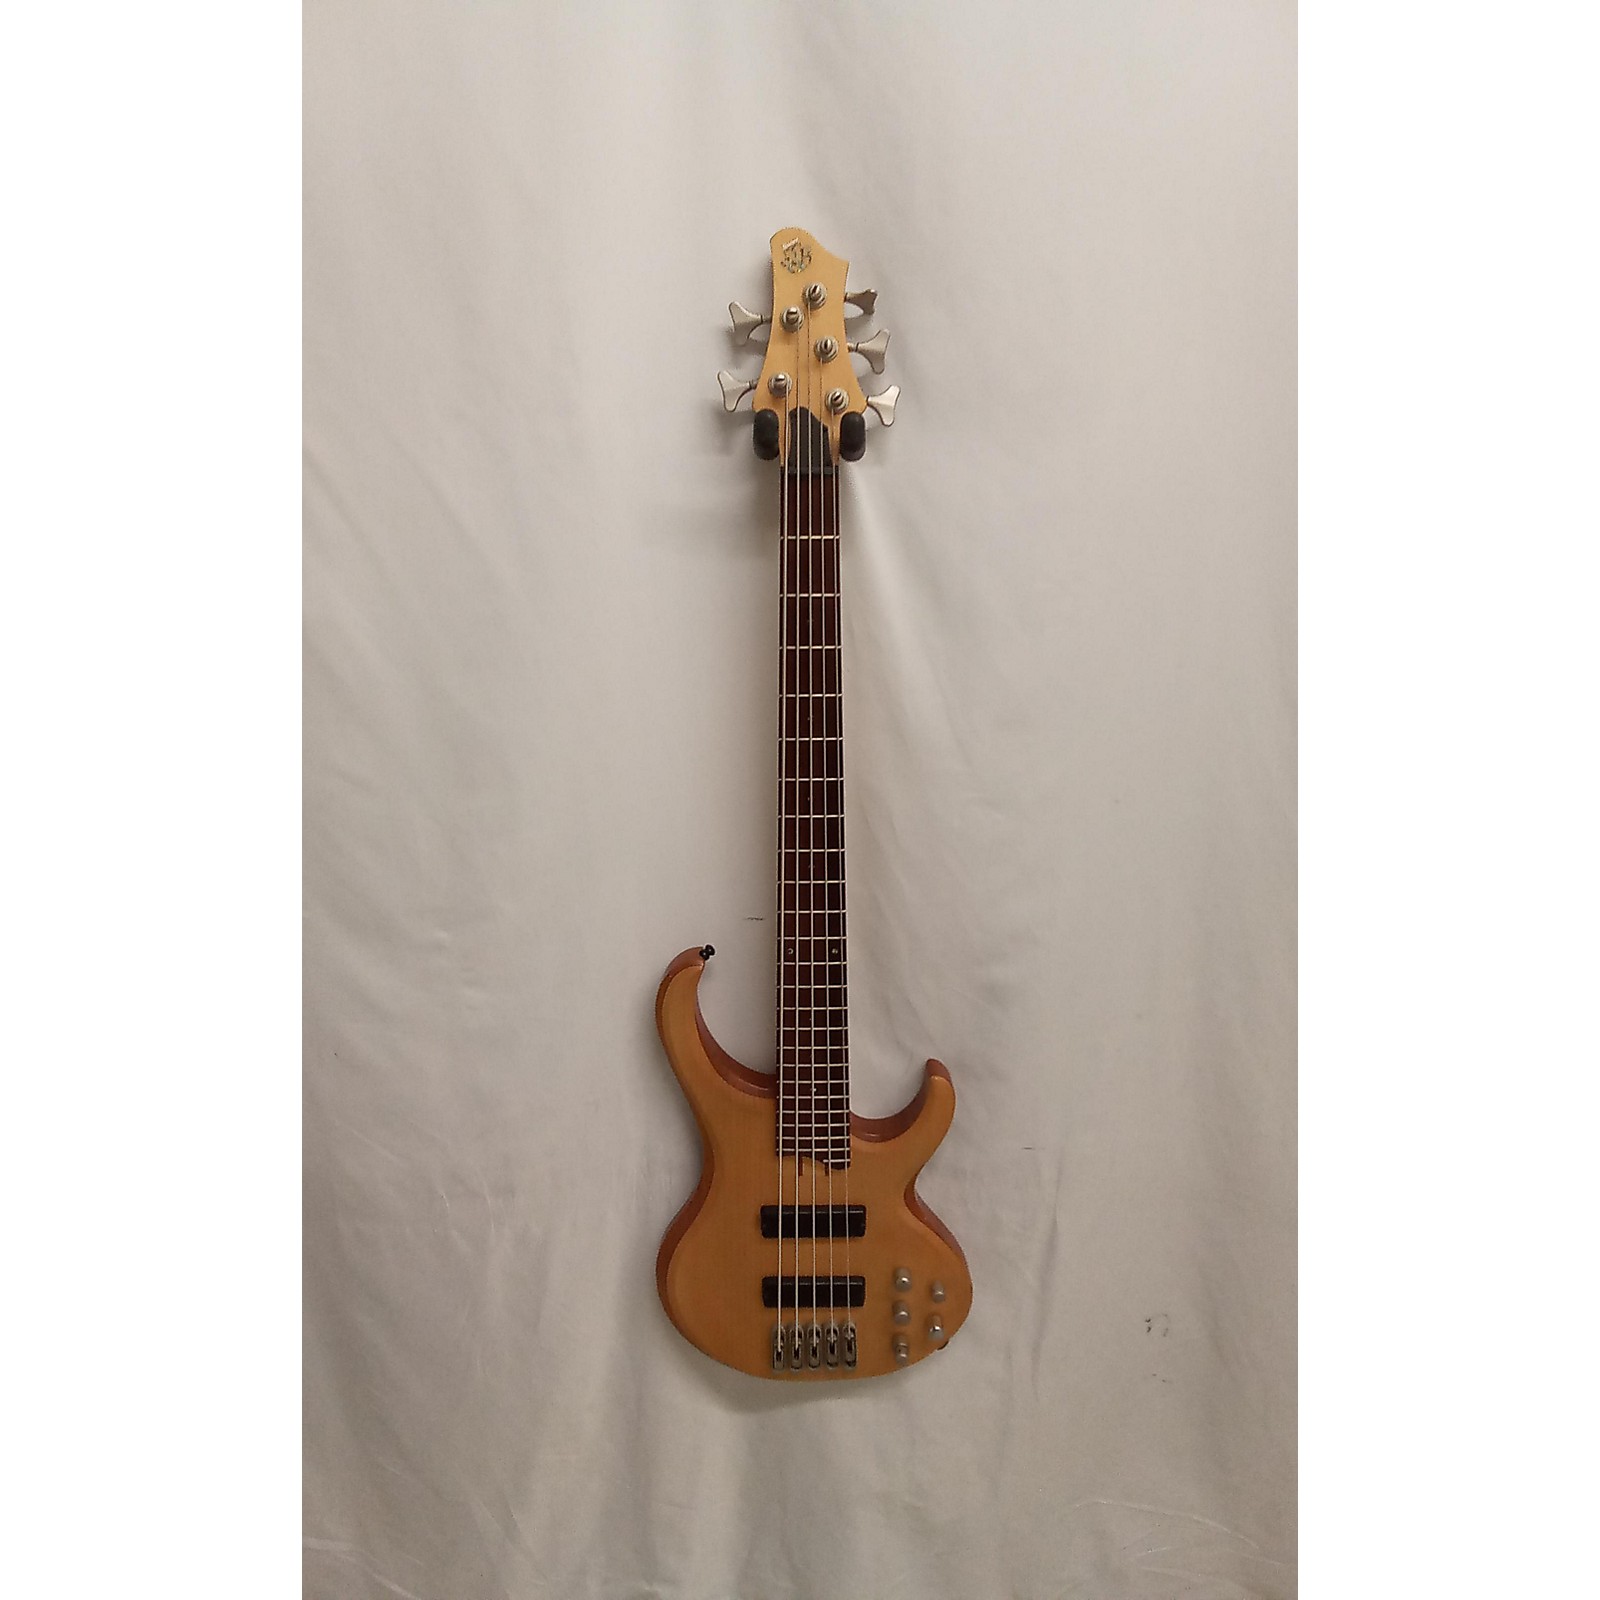 Used Ibanez BTB555 Electric Bass Guitar